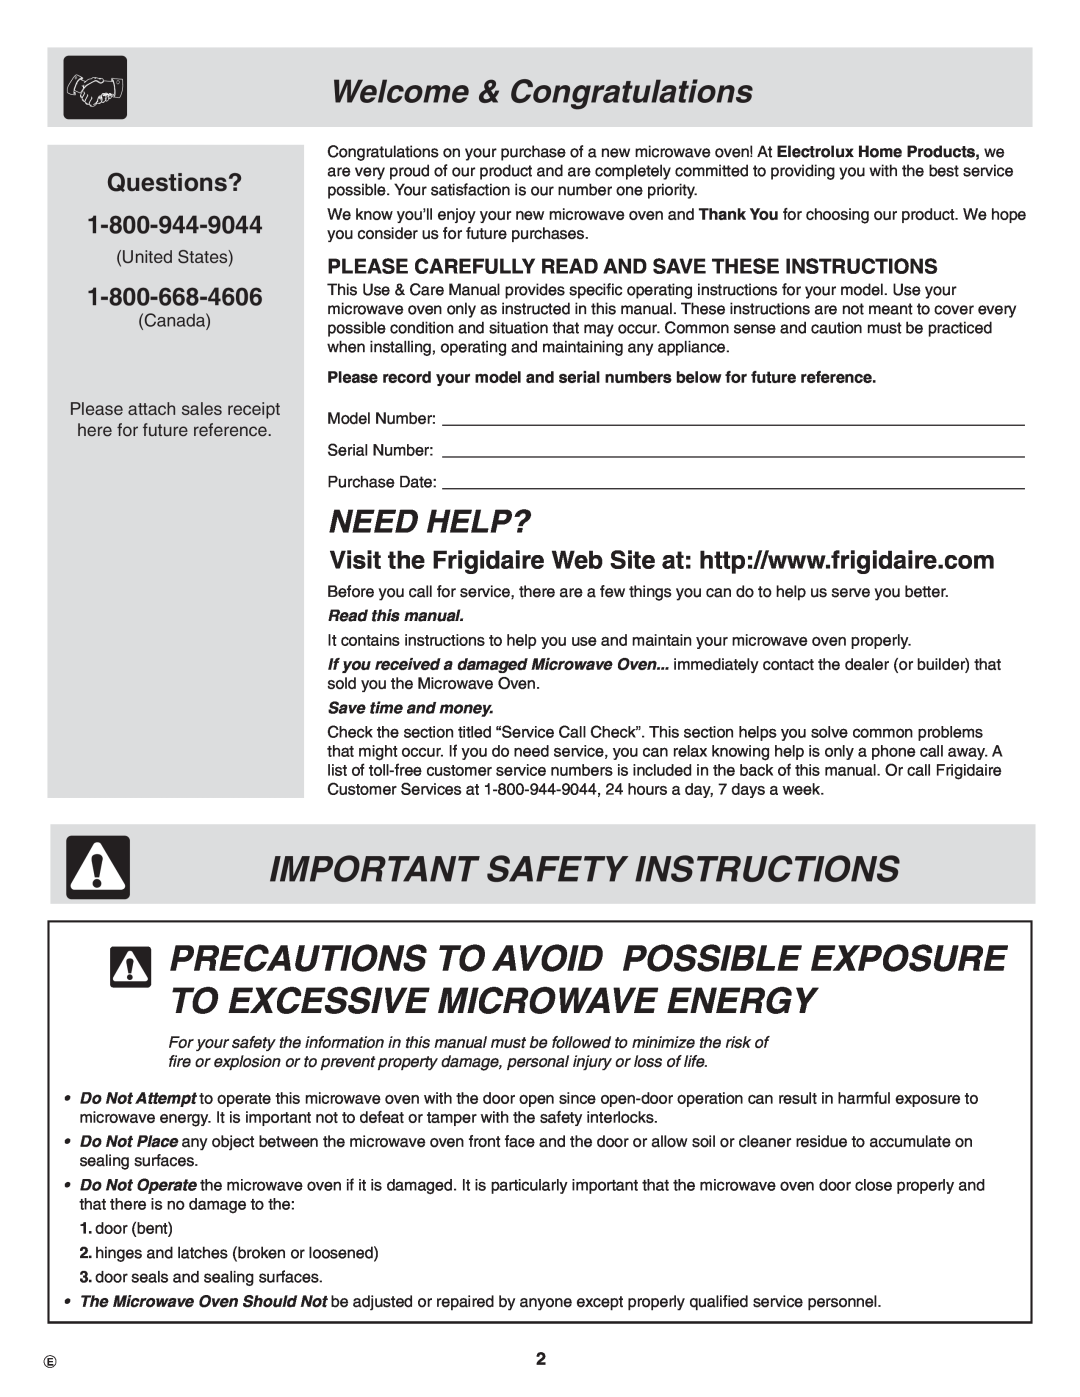 Frigidaire CPLMZ209 Important Safety Instructions, Precautions To Avoid Possible Exposure To Excessive Microwave Energy 